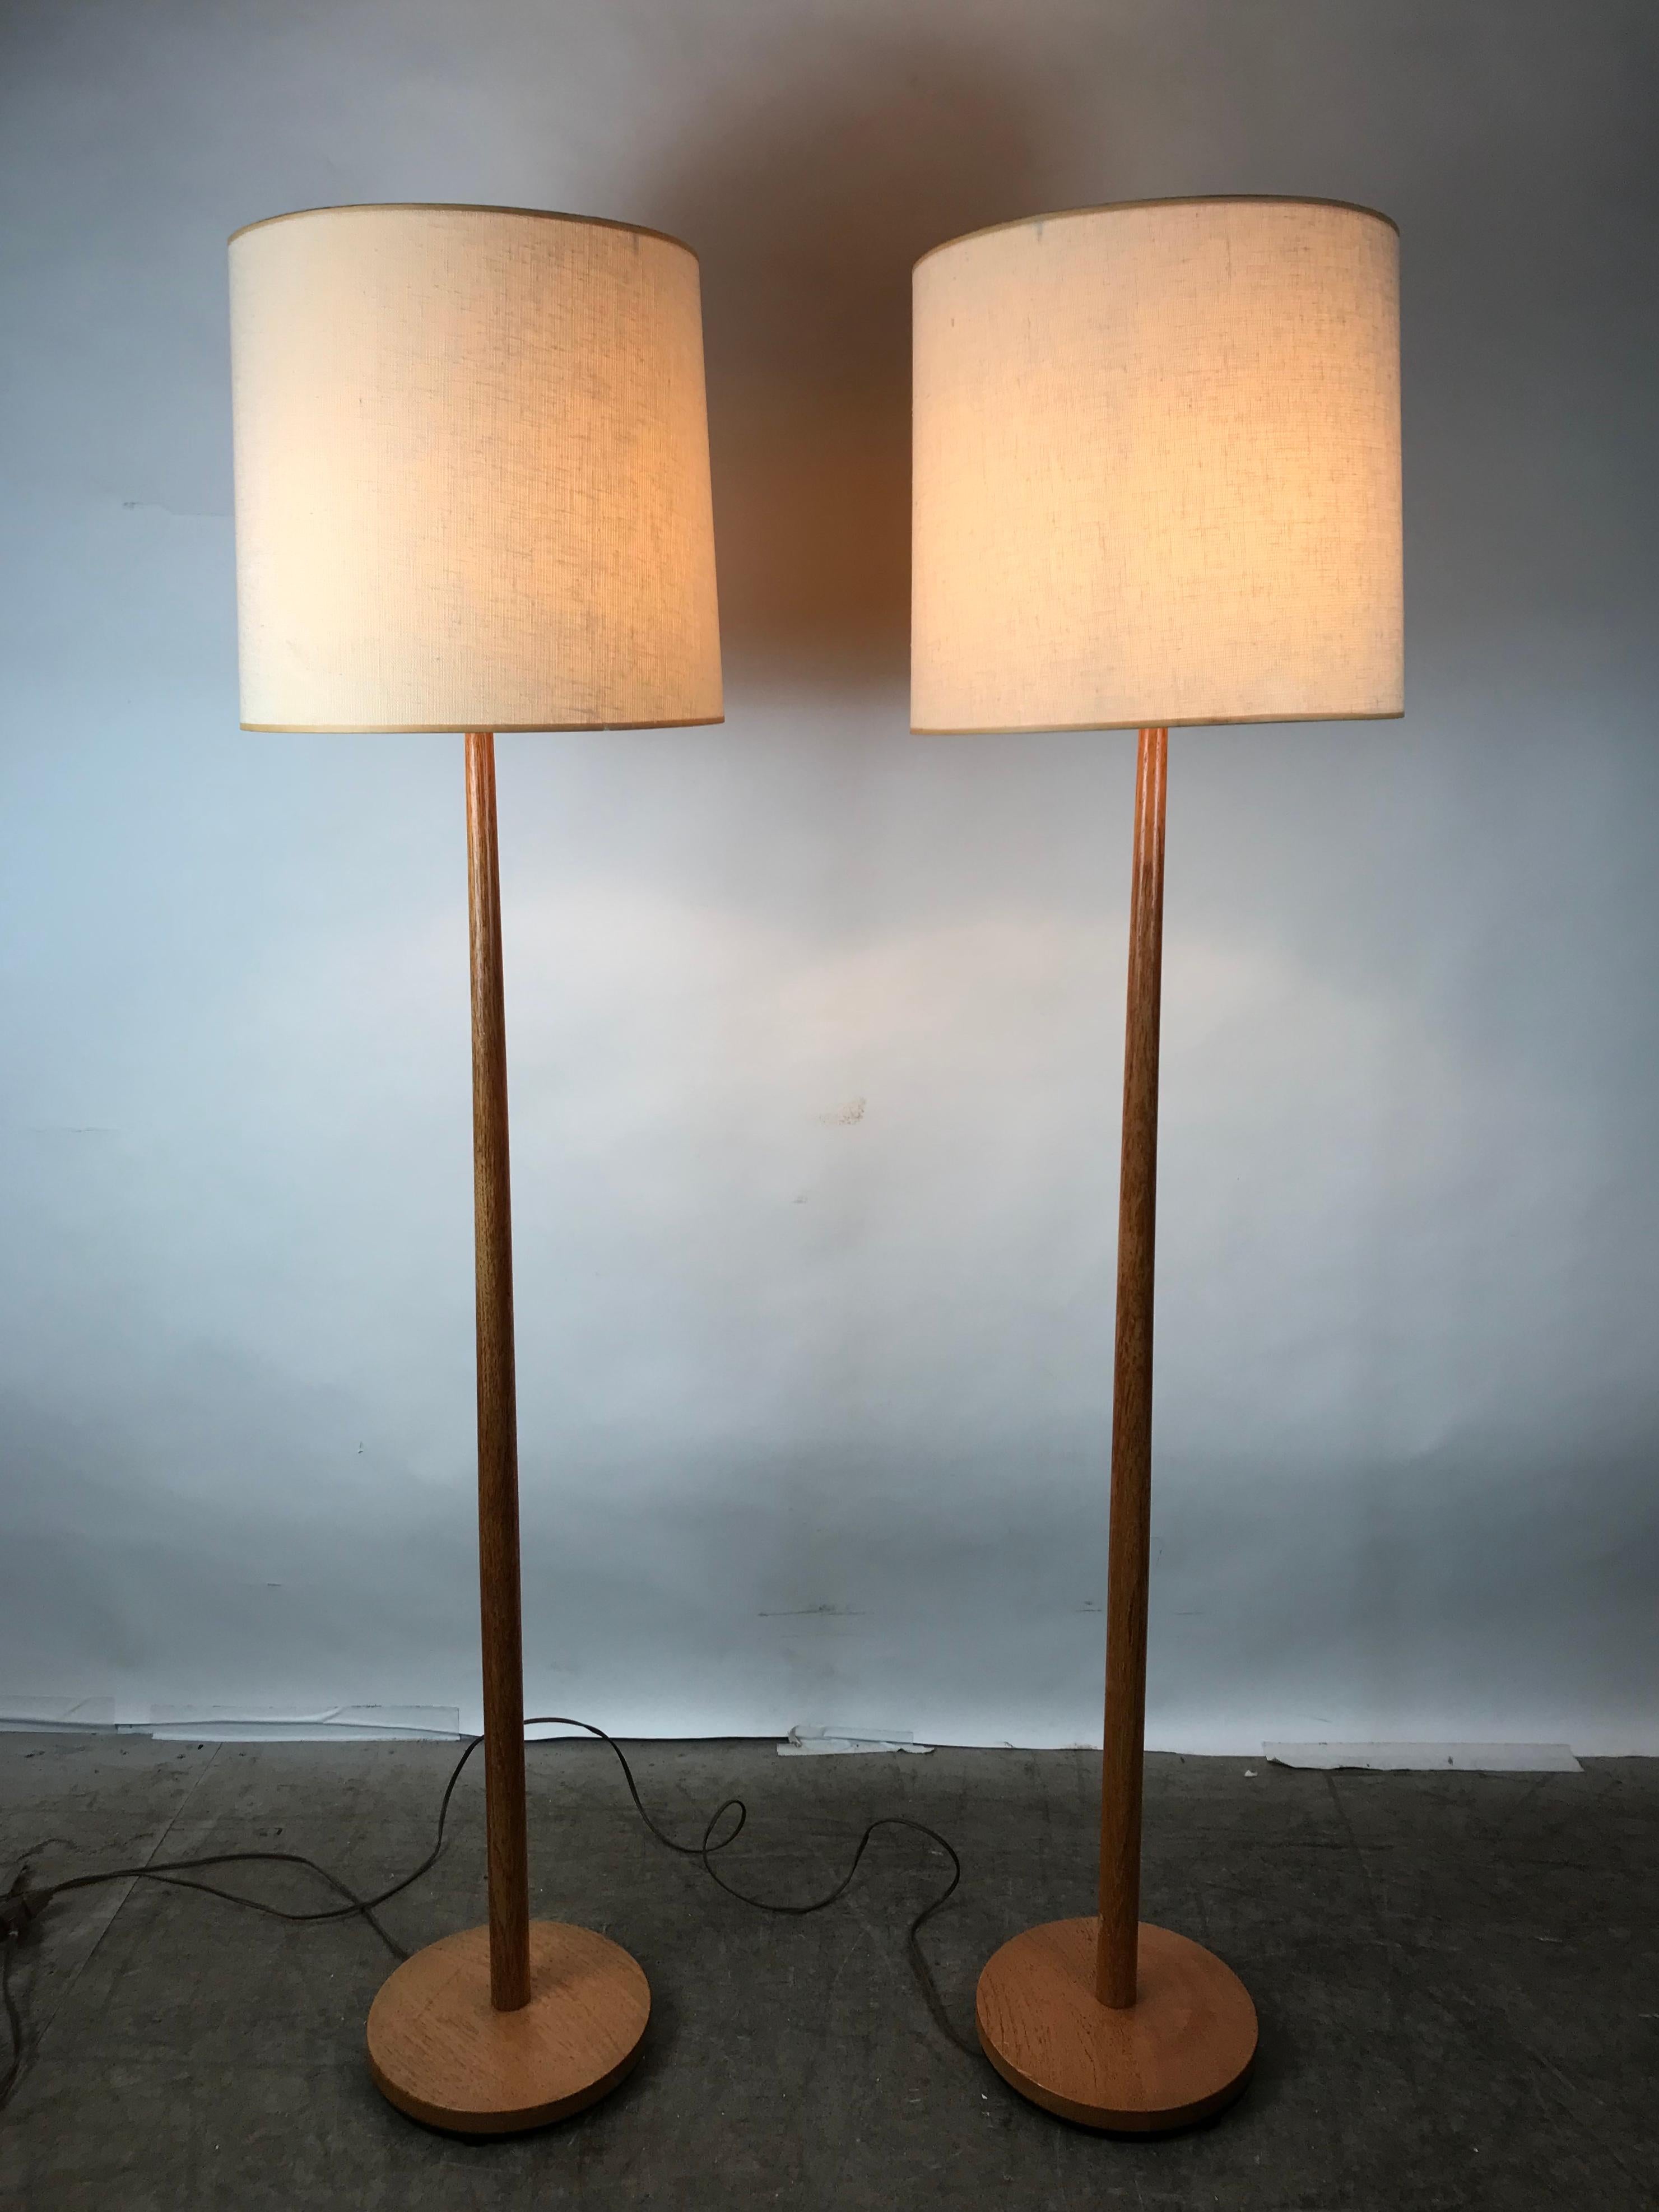 Swedish Pair of Teak Floor Lamps Attributed to Uno and Osten Kristiansson, Sweden, 1950